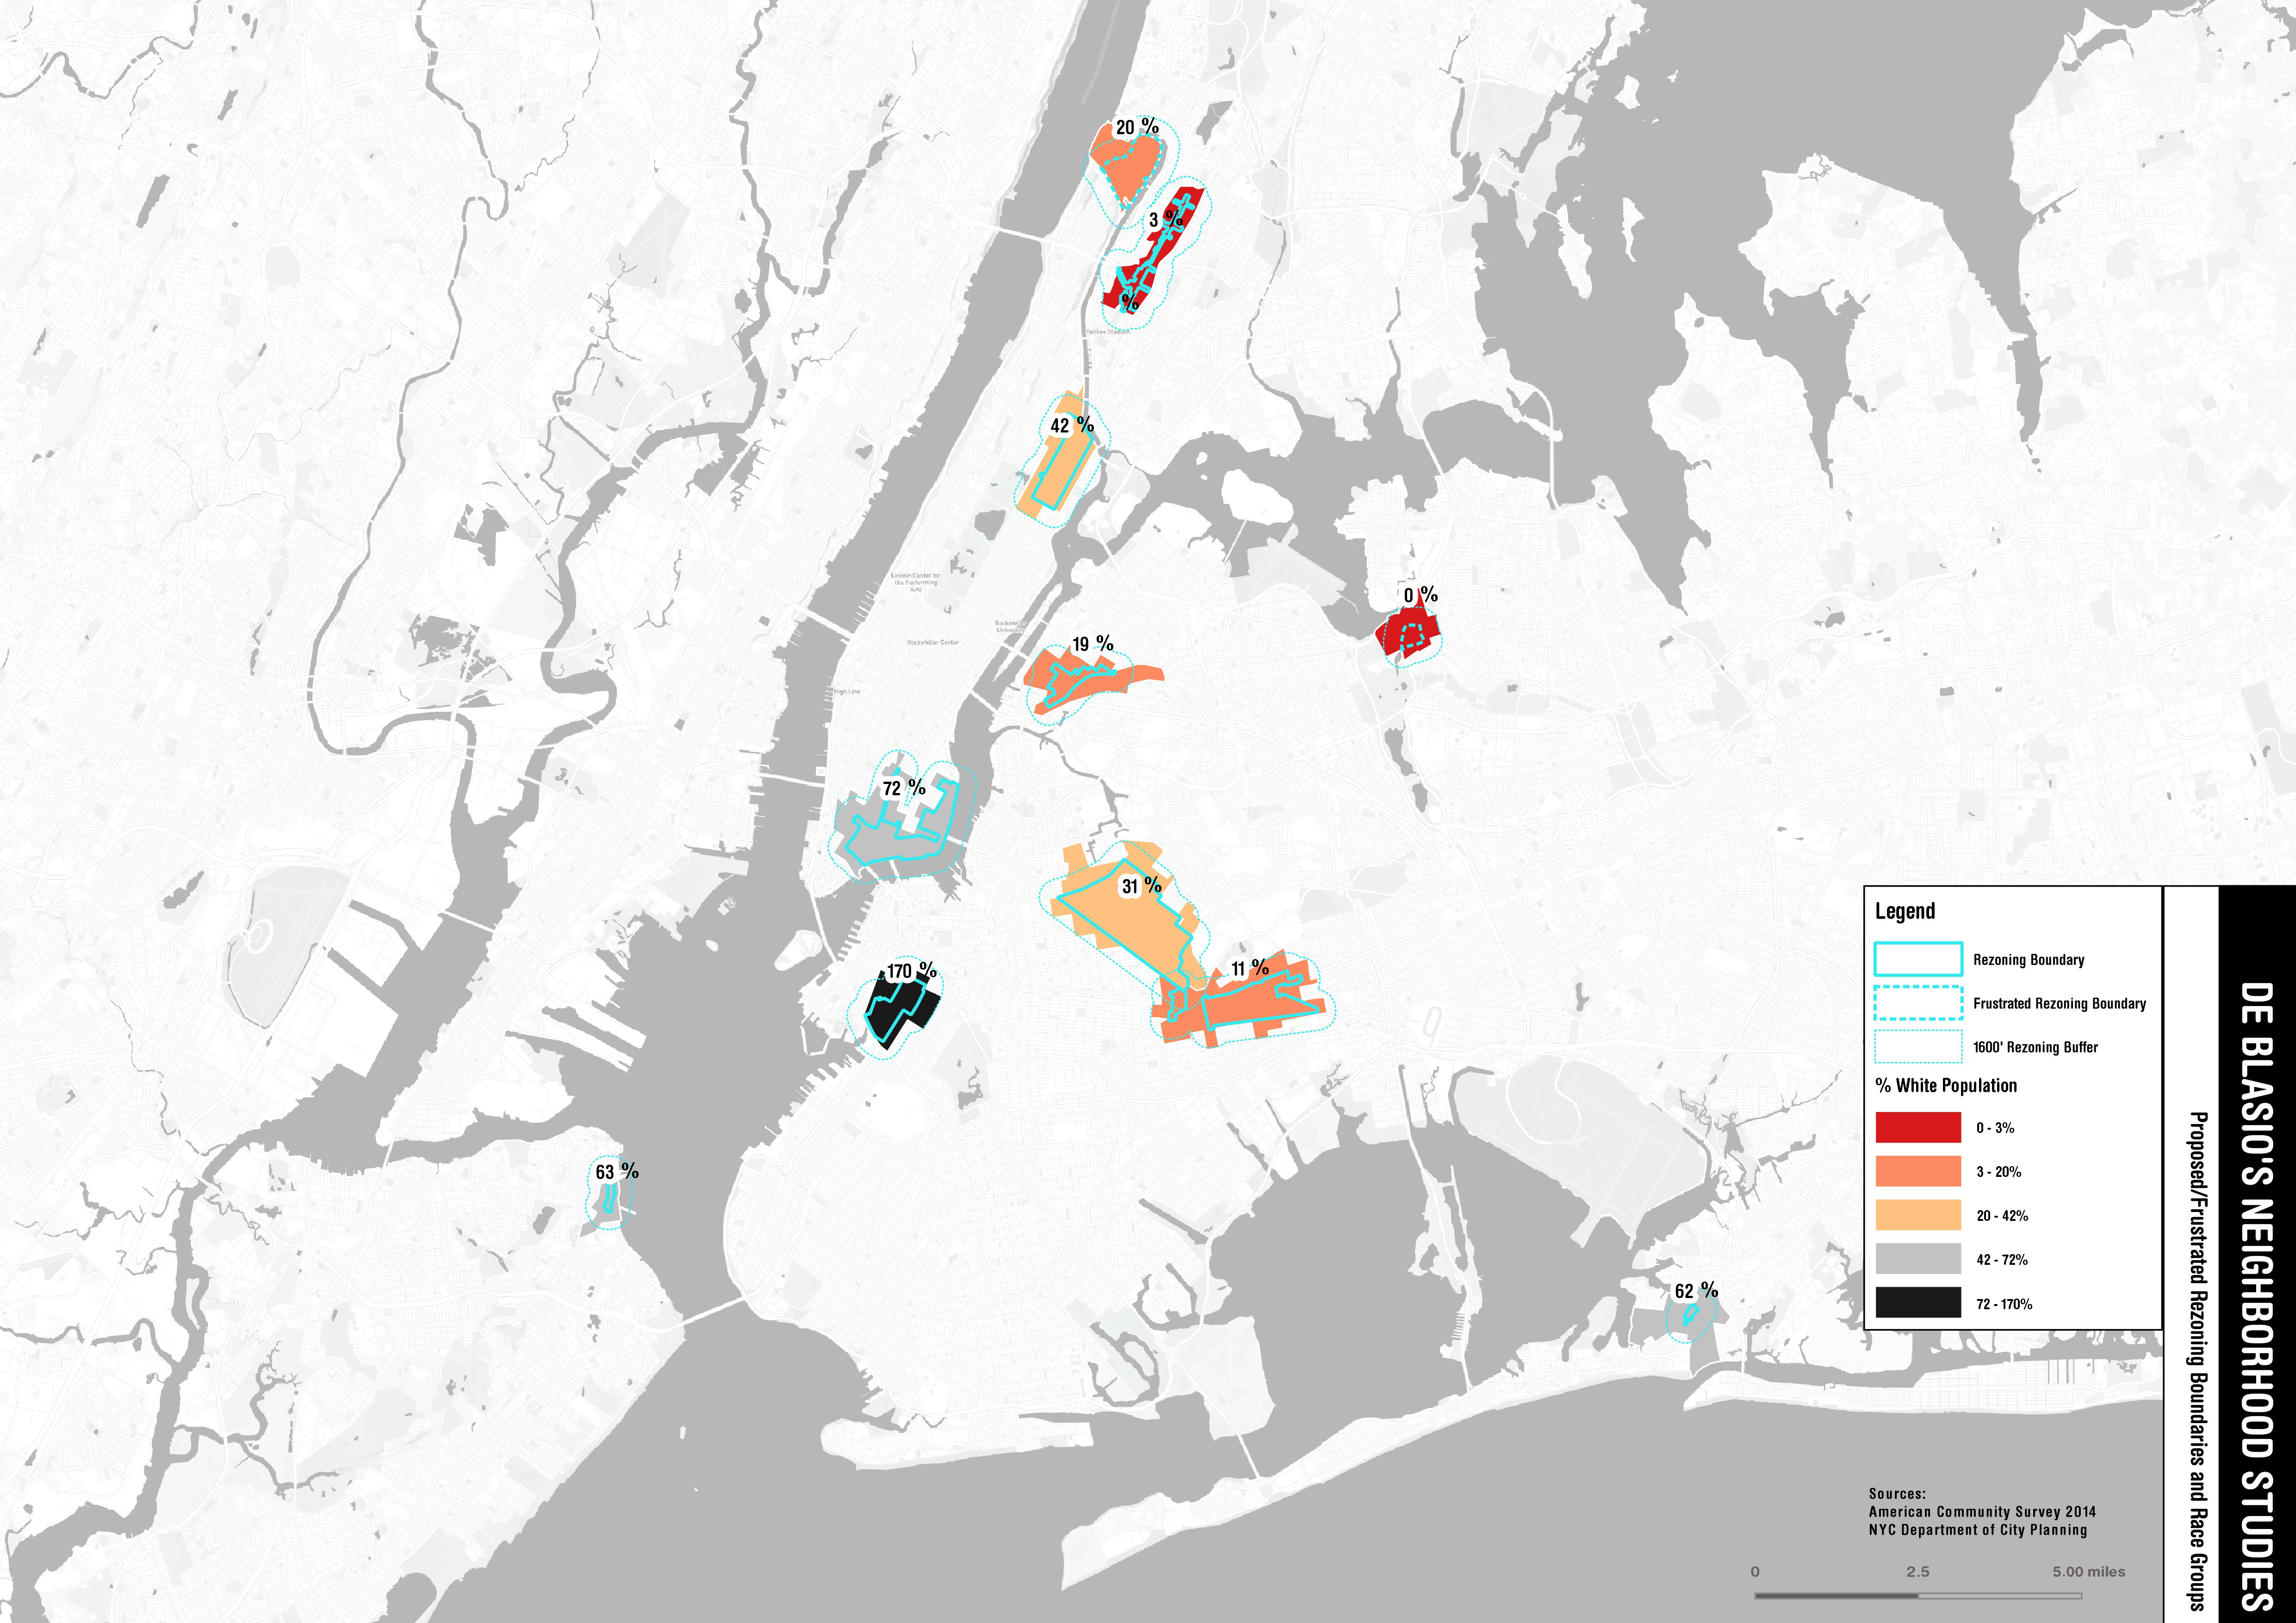 Urban Transformations in New York: Targeting the Vulnerable